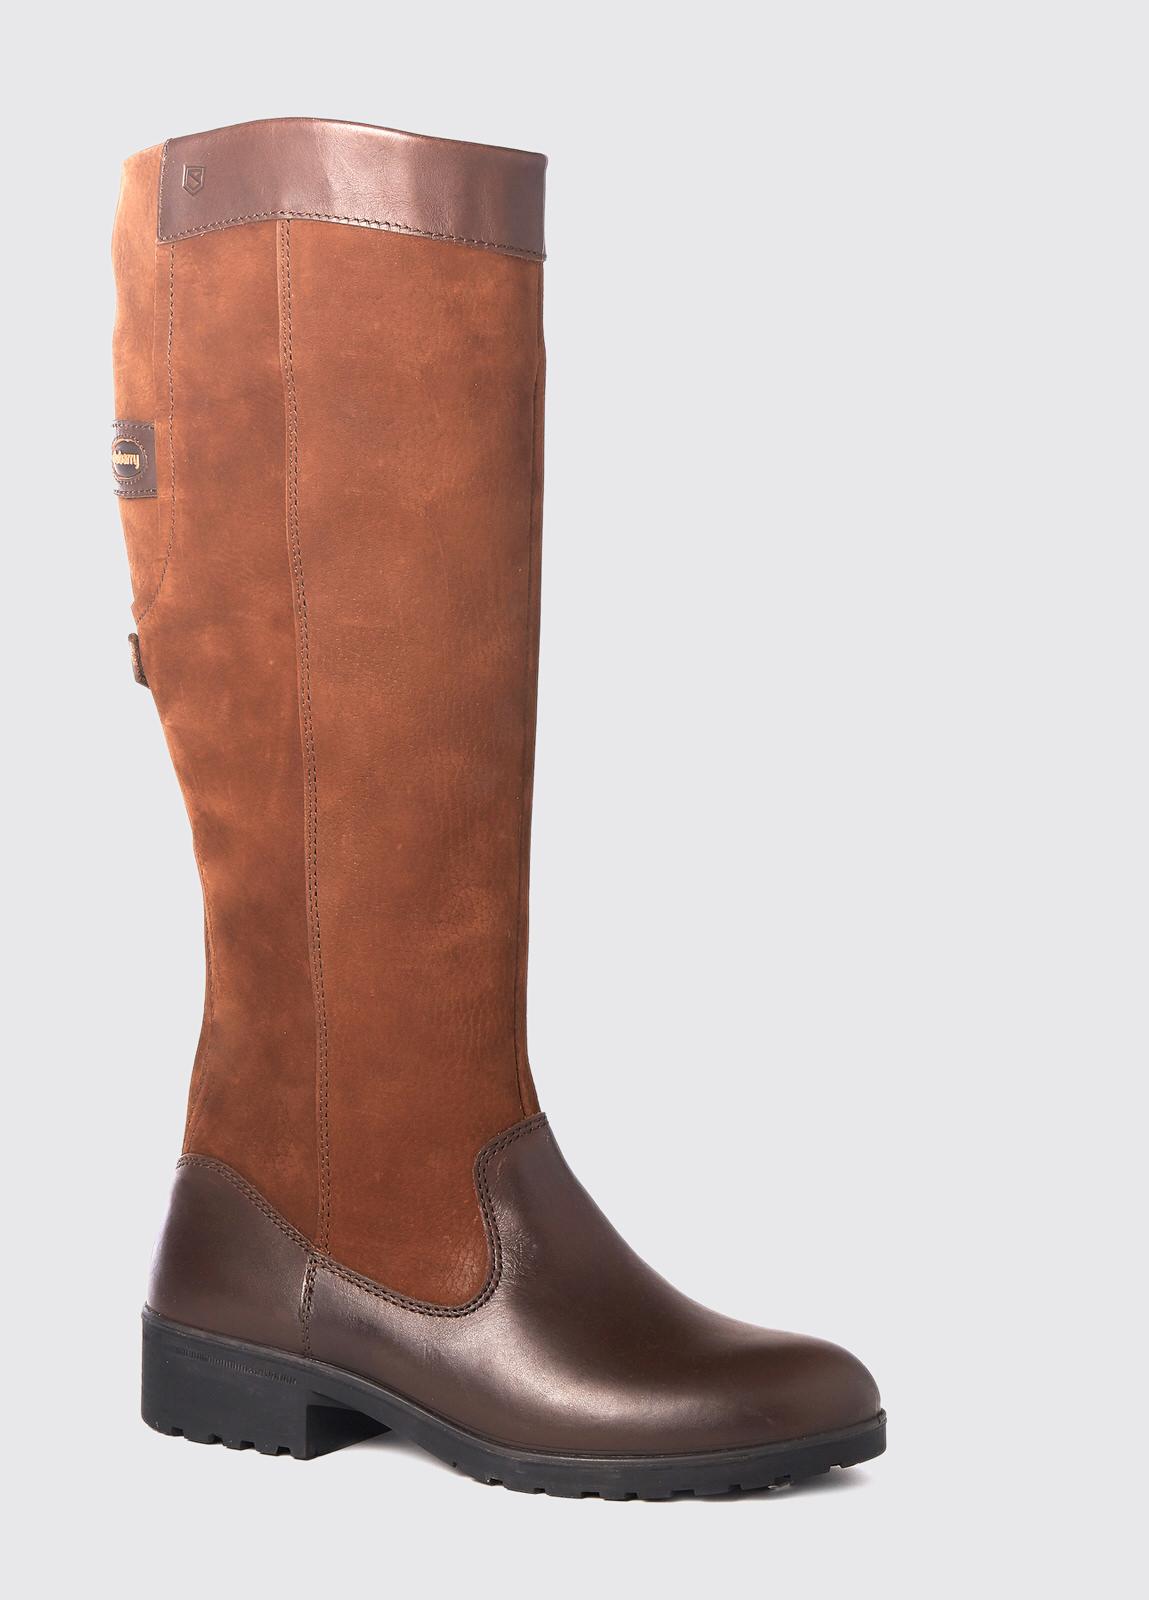 Lydighed ubemandede grænse Clare Country Boot | Dubarry of Ireland - USA